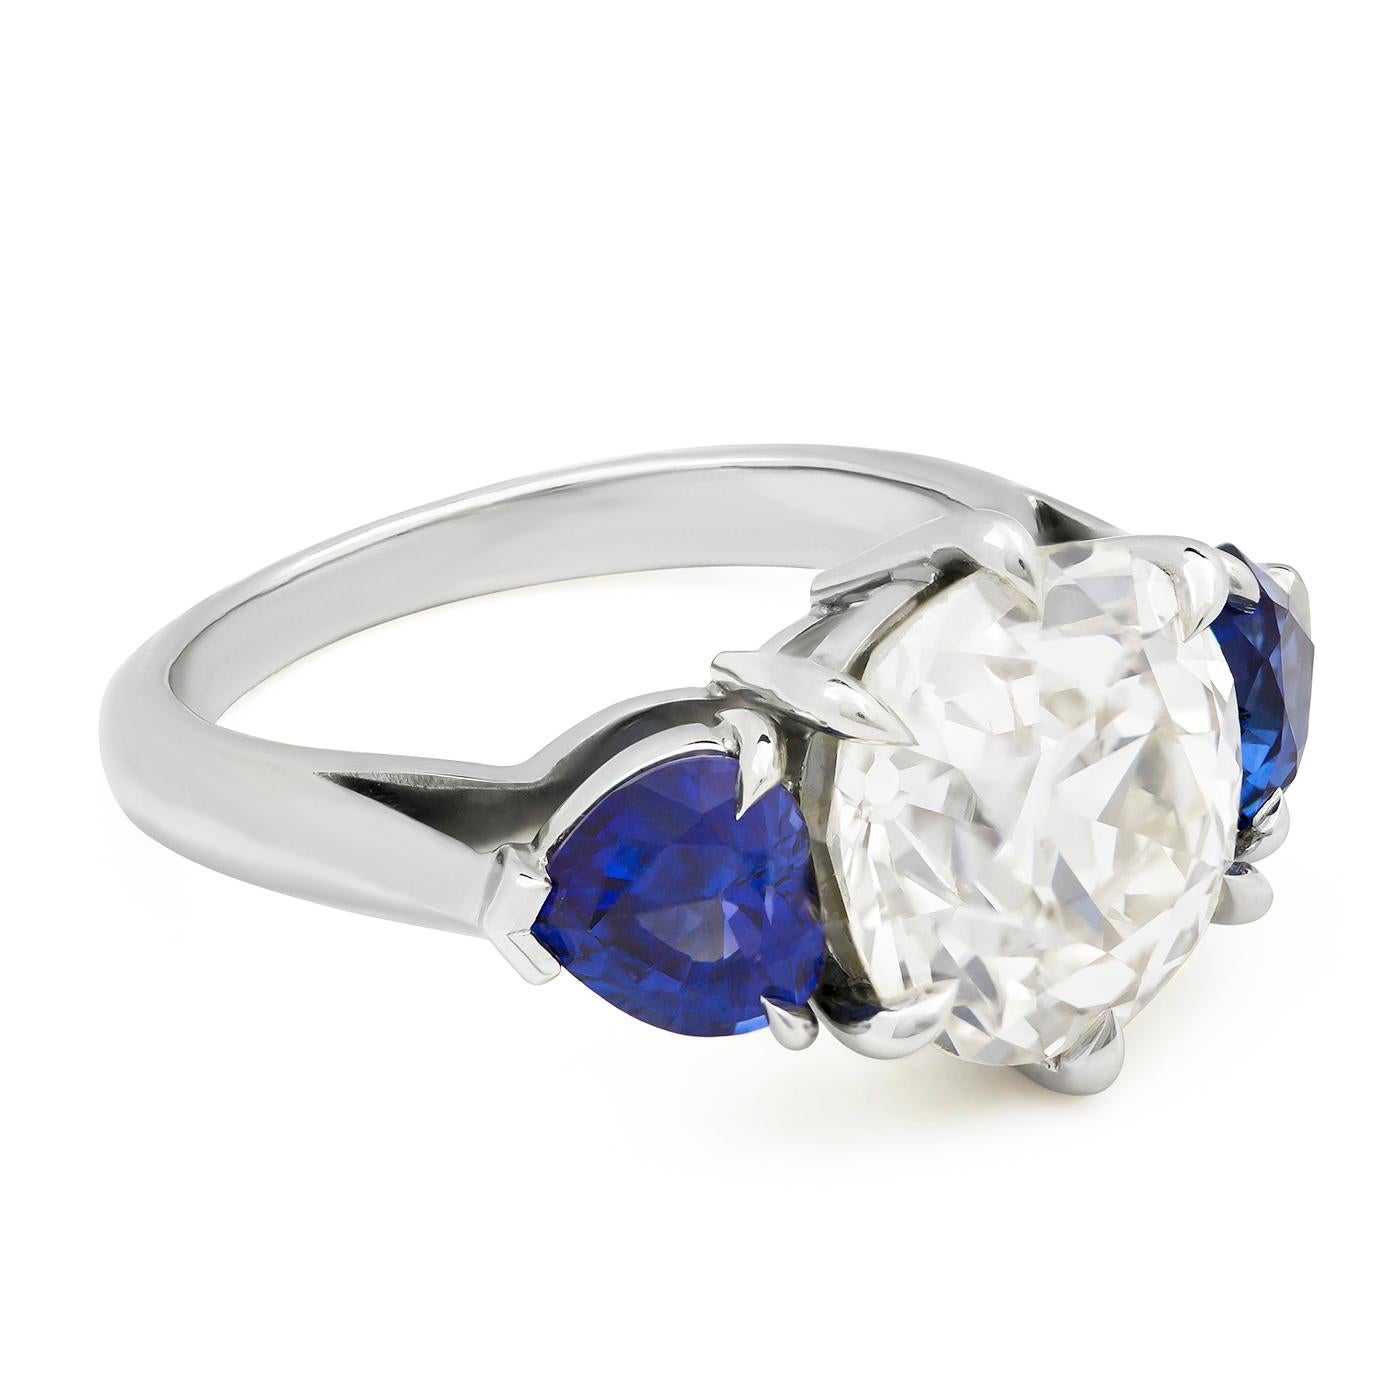 Immortalize the engagement with this gorgeous three-stone engagement ring; features a 4.04 carat old European cut diamond set in a timeless 6 prong setting. Flanking the center stone are two gorgeous and vibrant heart shaped blue sapphires on each